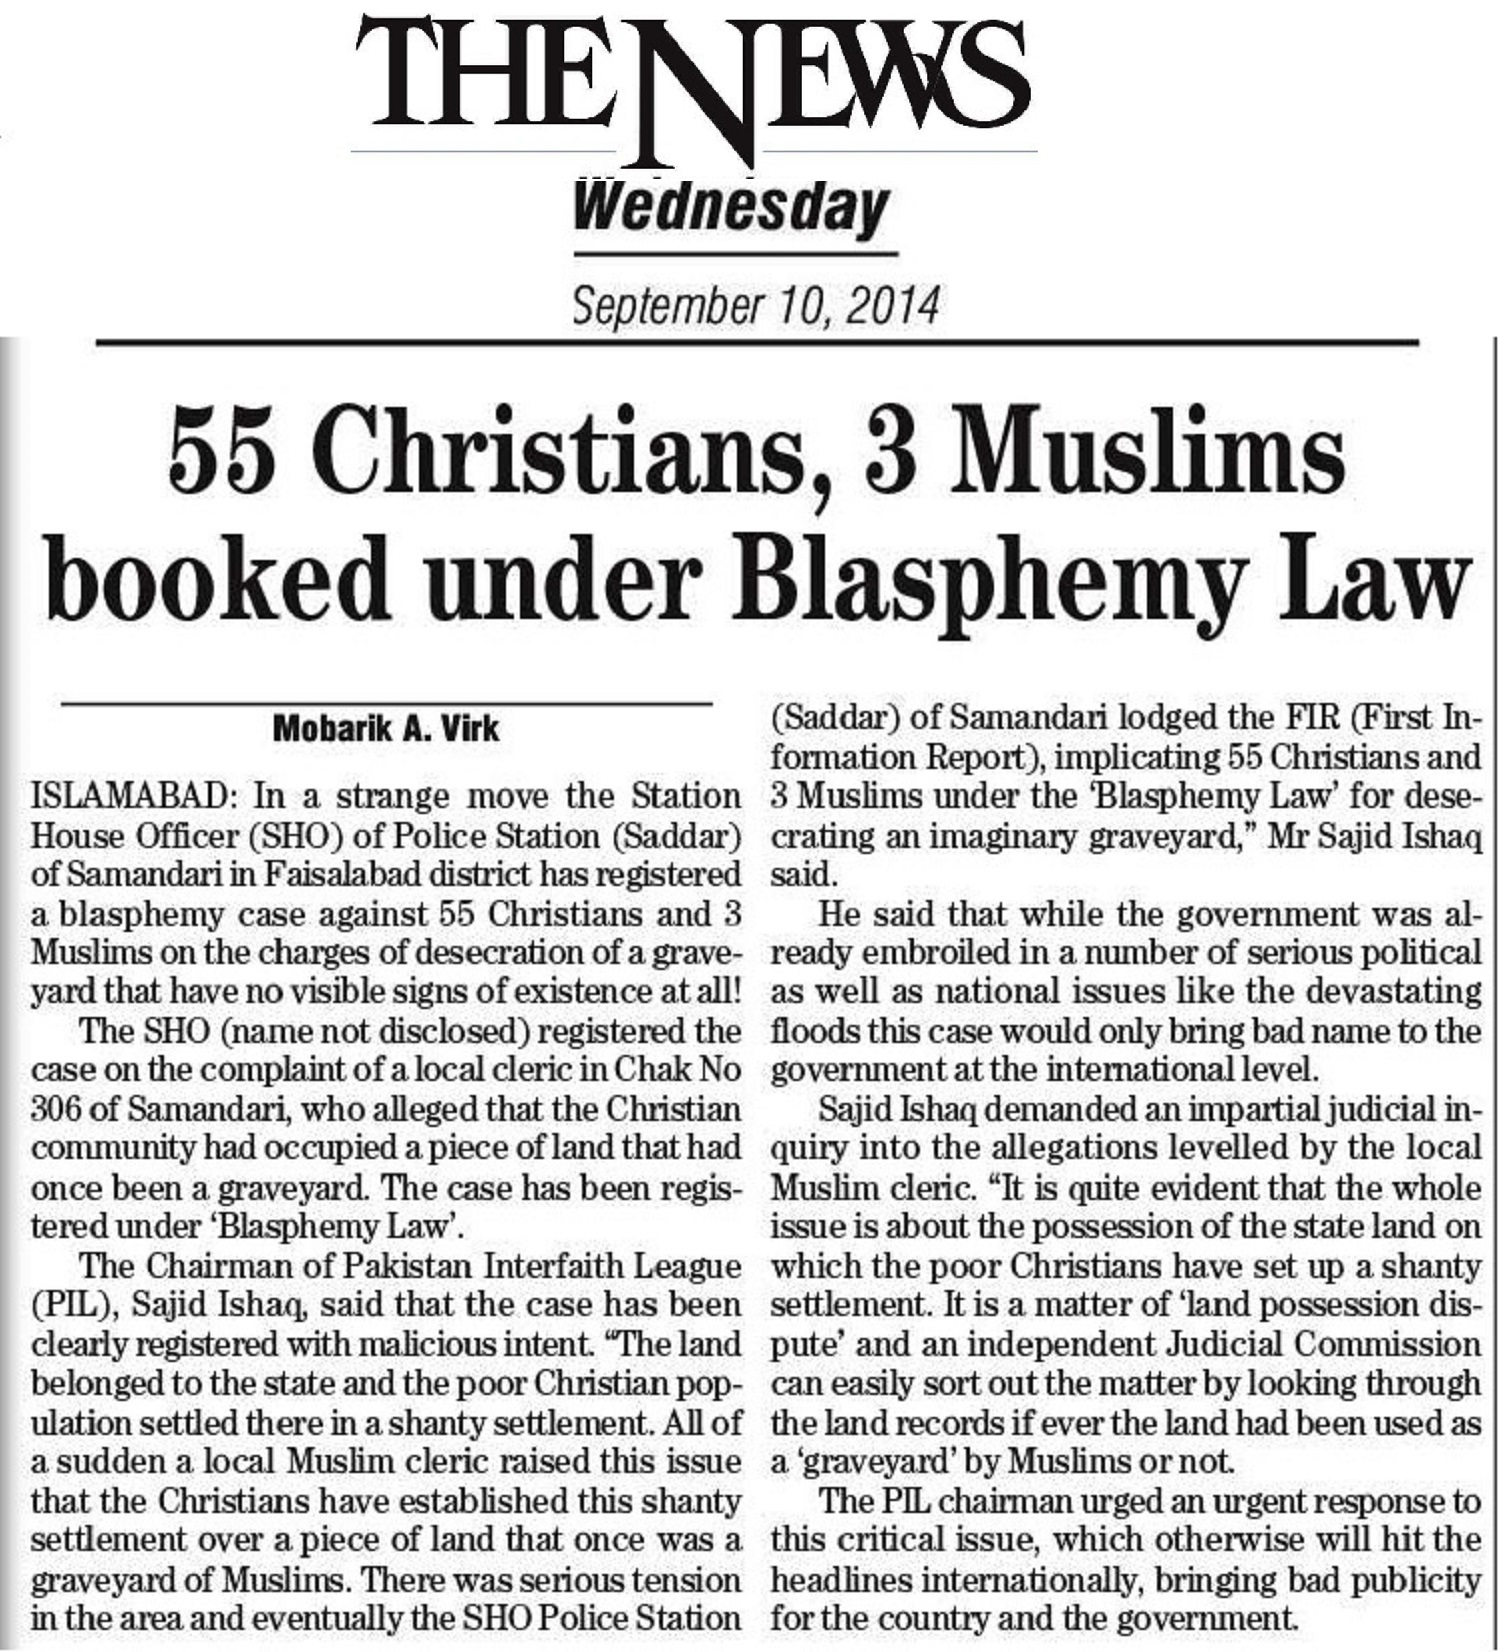 55 Christians, 3 Muslims booked under Blasphemy Law 